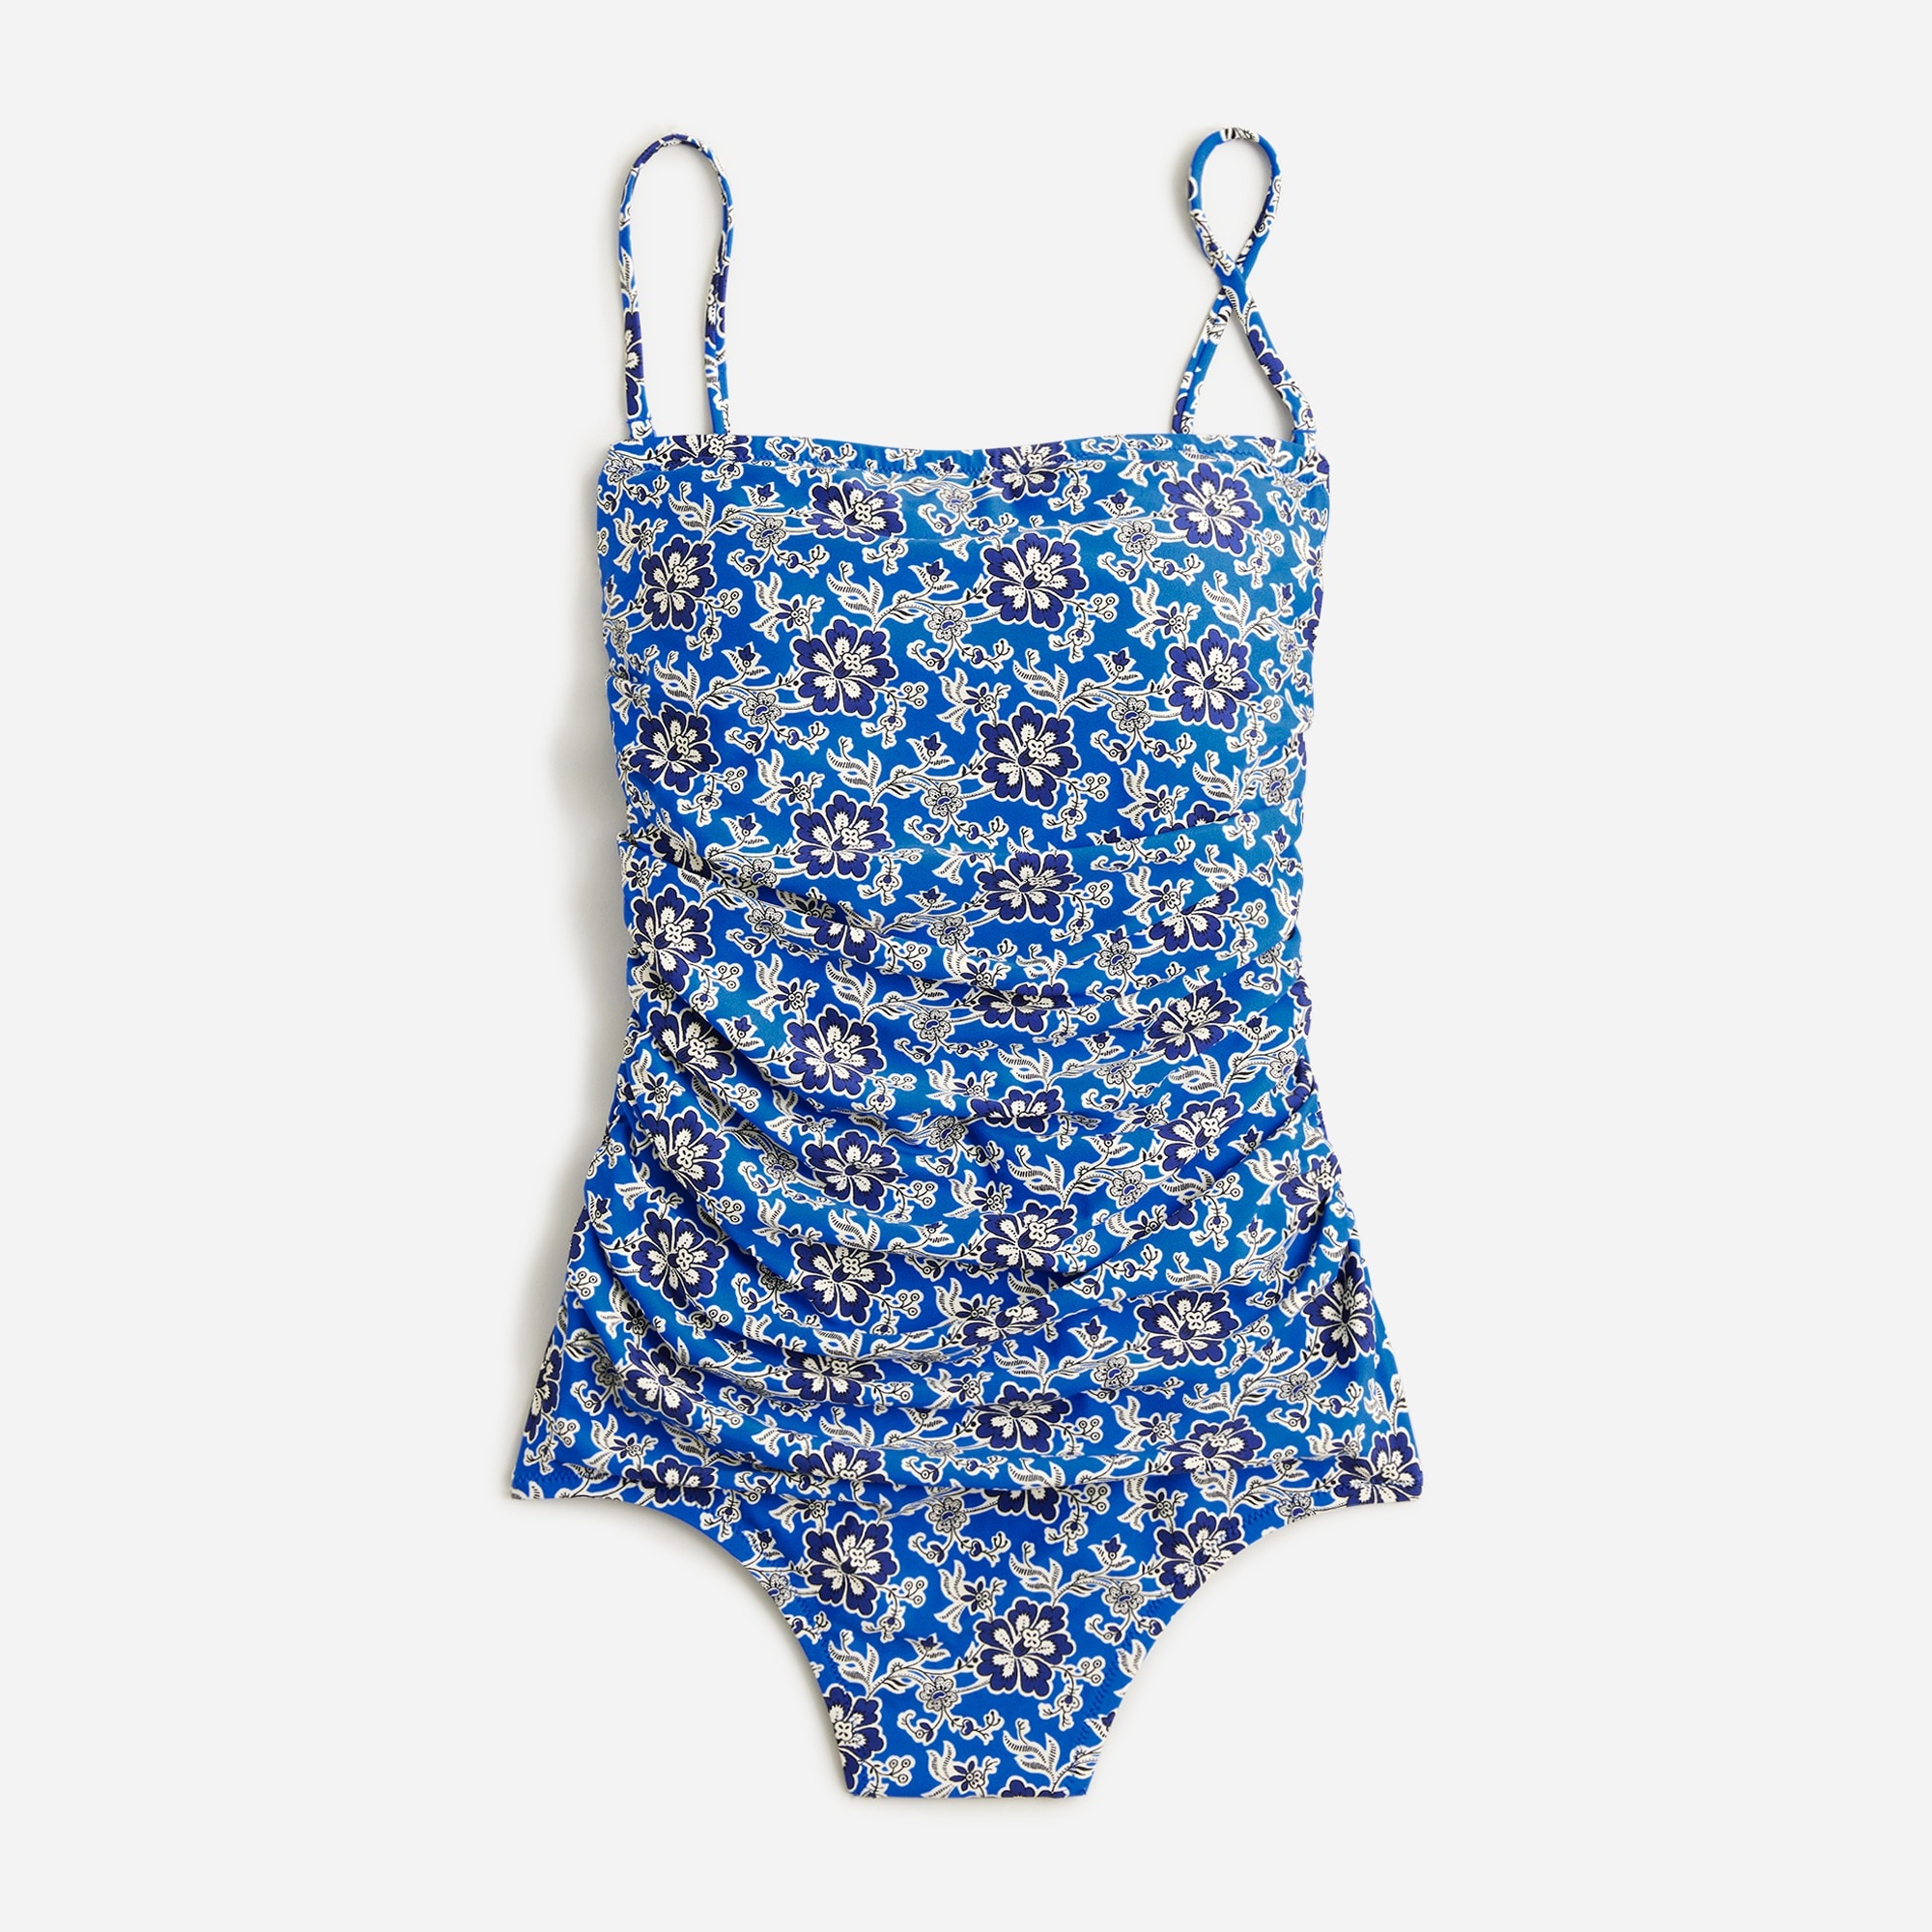  Ruched bandeau one-piece swimsuit in cobalt floral